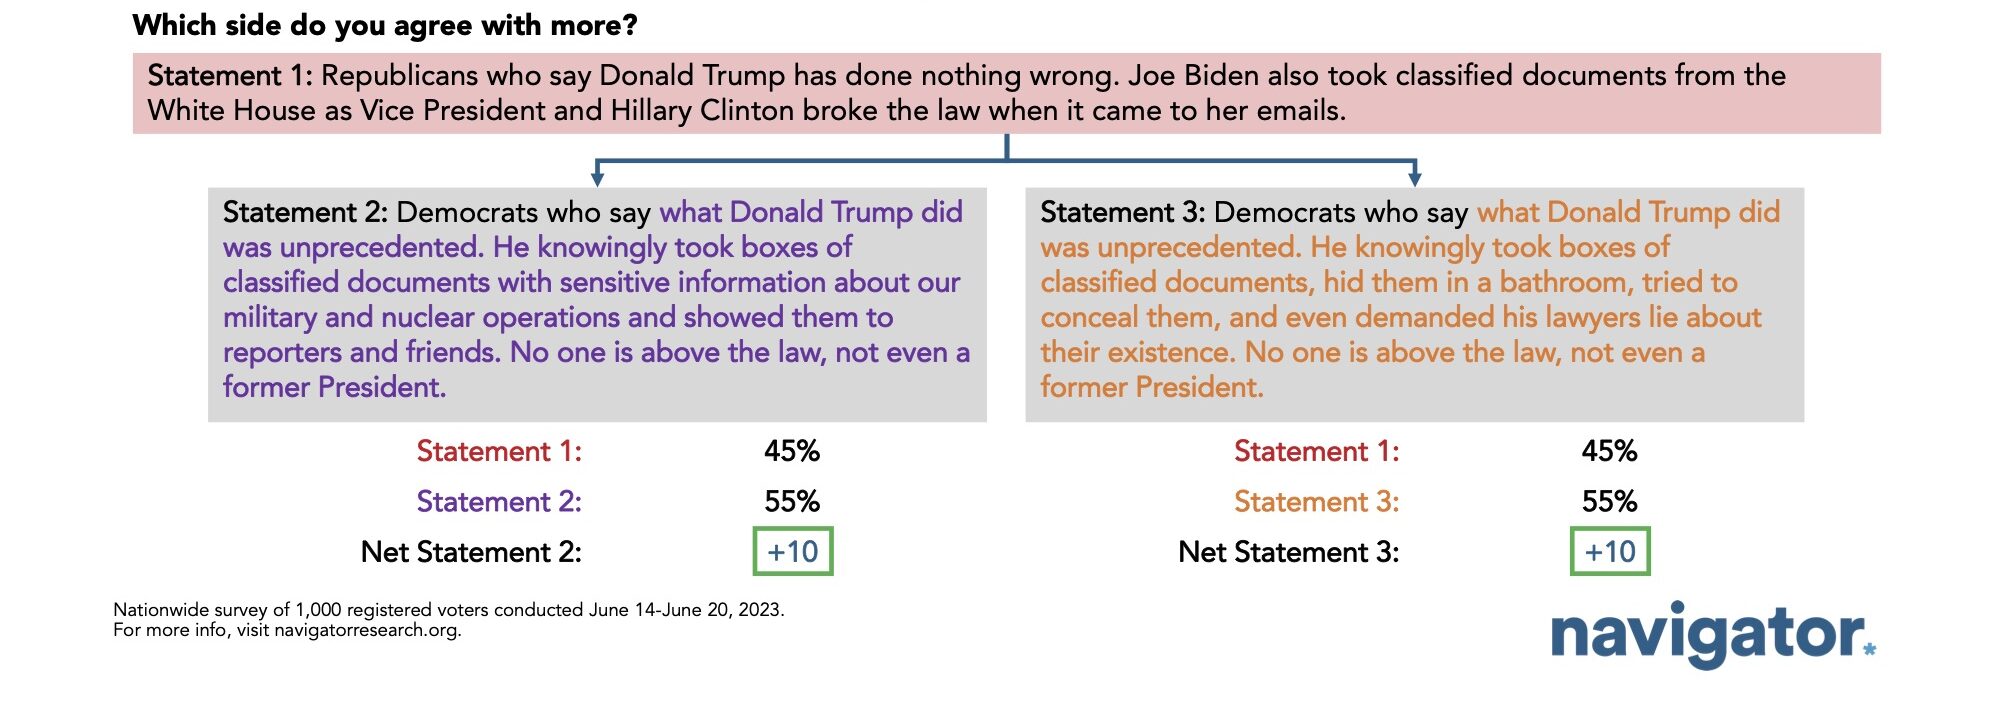 Bar graphs showing survey results to the following question: Which side do you agree with more? Statement 1: Republicans who say Donald Trump has done nothing wrong. Joe Biden also took classified documents from the White House as Vice President and Hillary Clinton broke the law when it came to her emails. Statement 2: Democrats who say what Donald Trump did was unprecedented. He knowingly took boxes of classified documents with sensitive information about our military and nuclear operations and showed them to reporters and friends. No one is above the law, not even a former President. Statement 3: Democrats who say what Donald Trump did was unprecedented. He knowingly took boxes of classified documents, hid them in a bathroom, tried to conceal them, and even demanded his lawyers lie about their existence. No one is above the law, not even a former President.